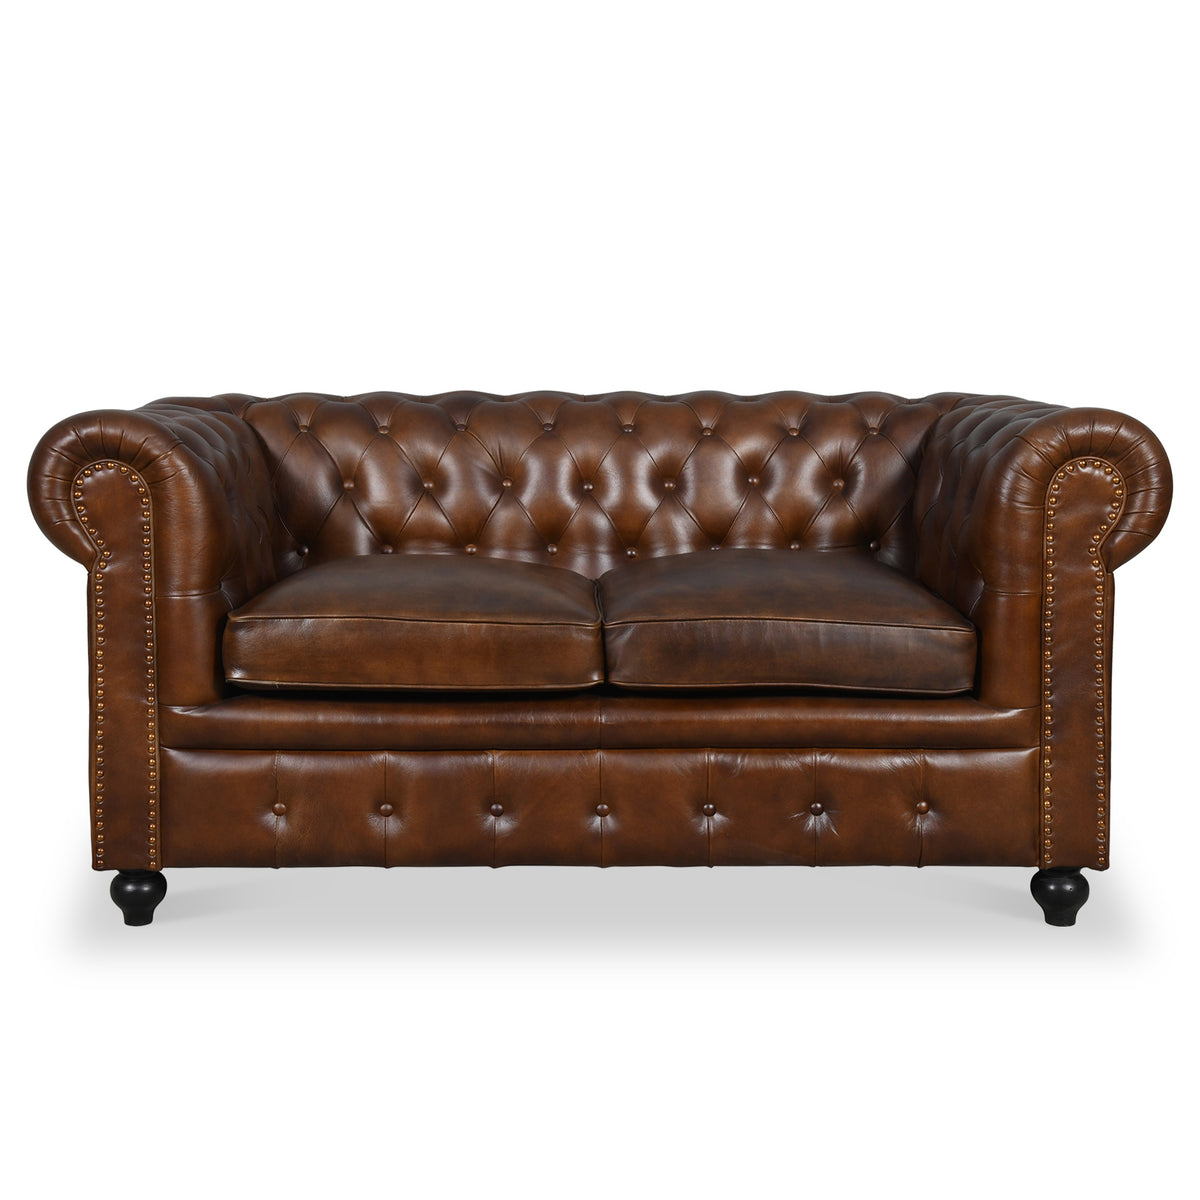 Nina Leather Chesterfield 2 Seat Sofa from Roseland